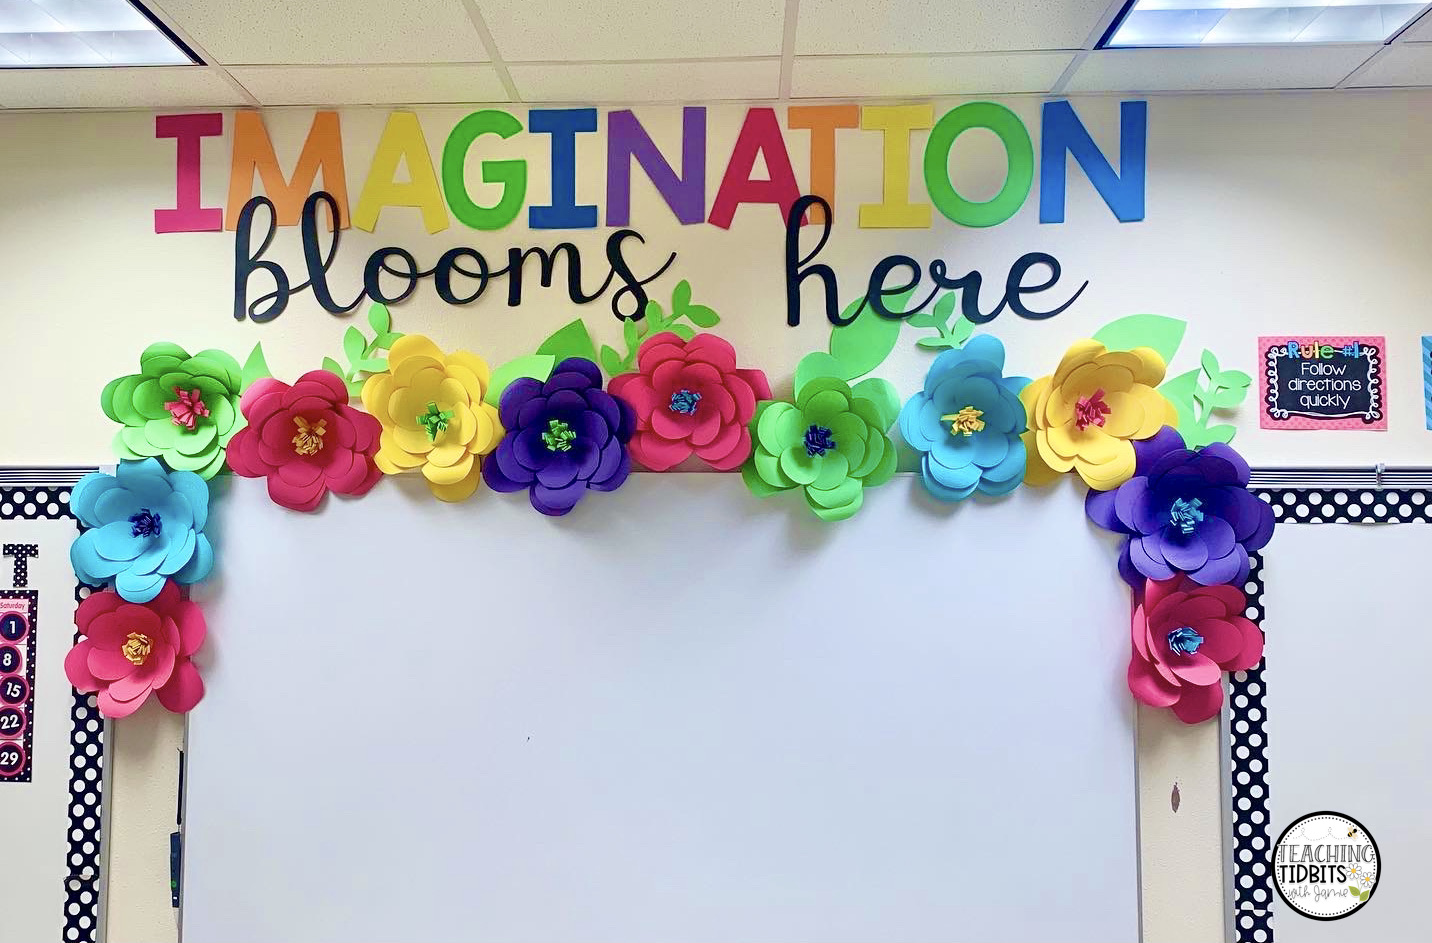 Imagination Blooms Here classroom display